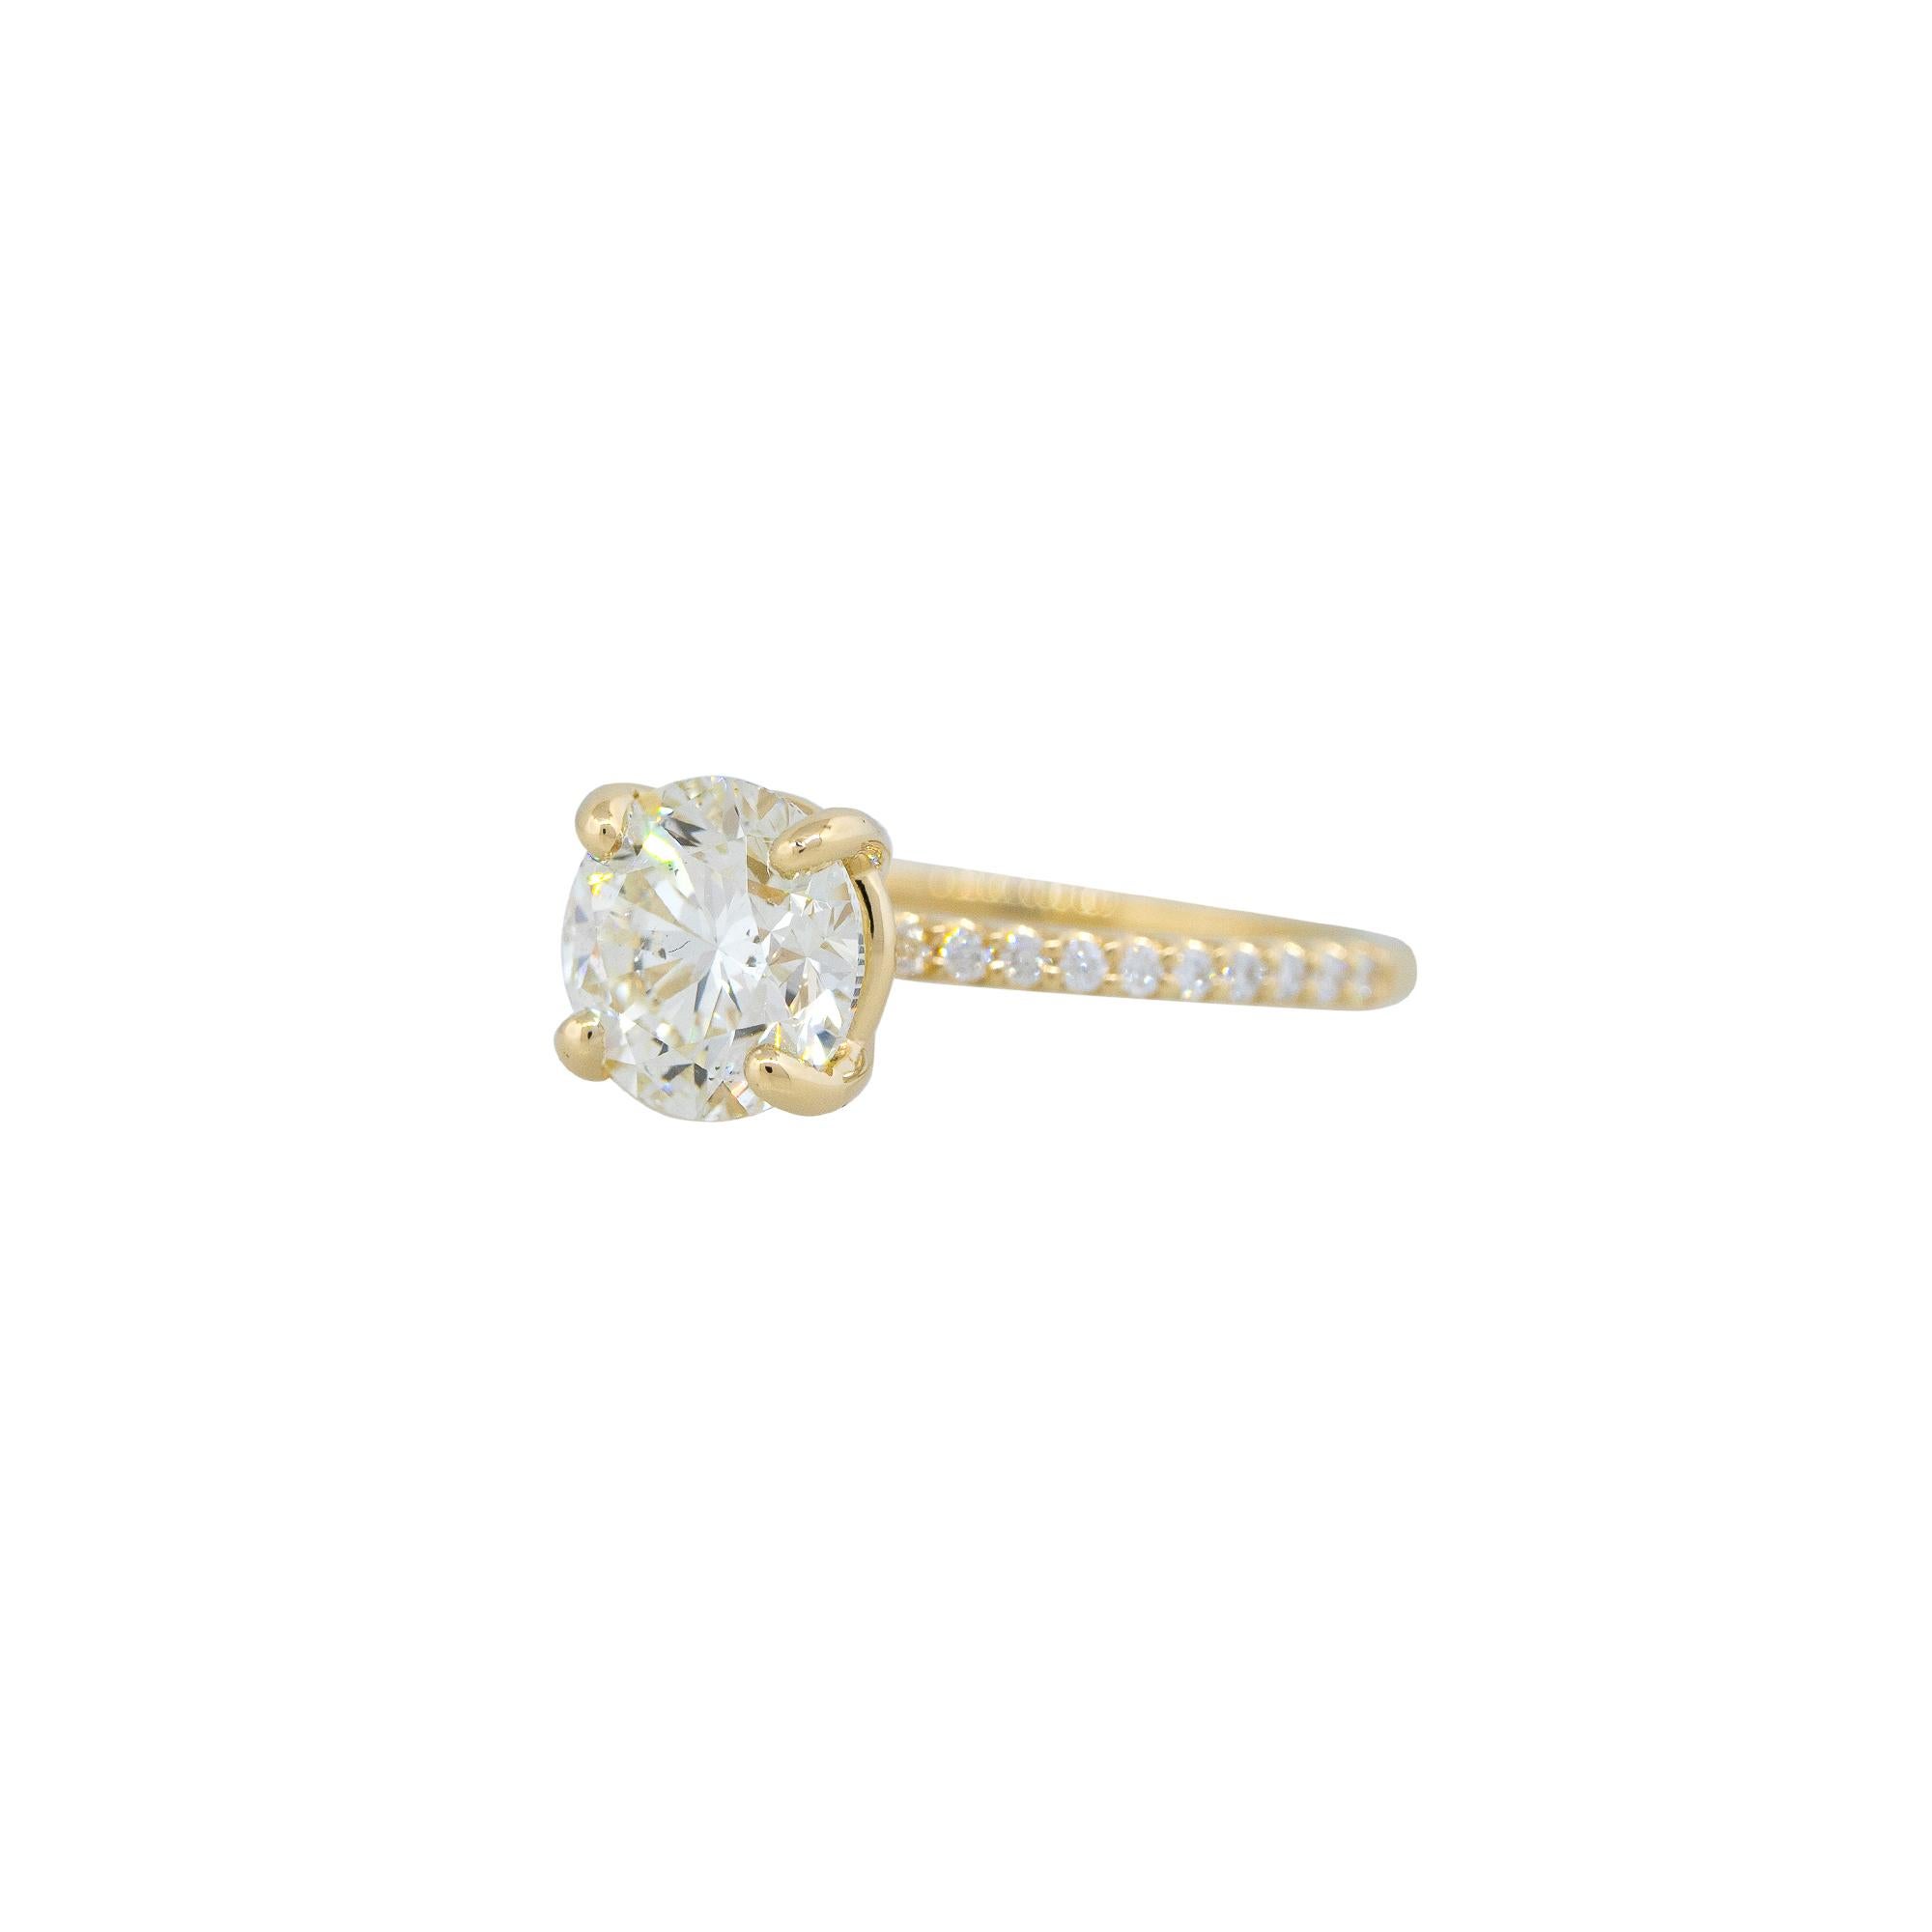 GIA Certified 14 Karat Yellow Gold 2.23 Carat Round Brilliant Diamond Engagement Ring

This diamond has been certified by the Gemological Institute of America.

Product: Round Brilliant Diamond Engagement Ring
Material: 14k Yellow Gold
GIA Diamond